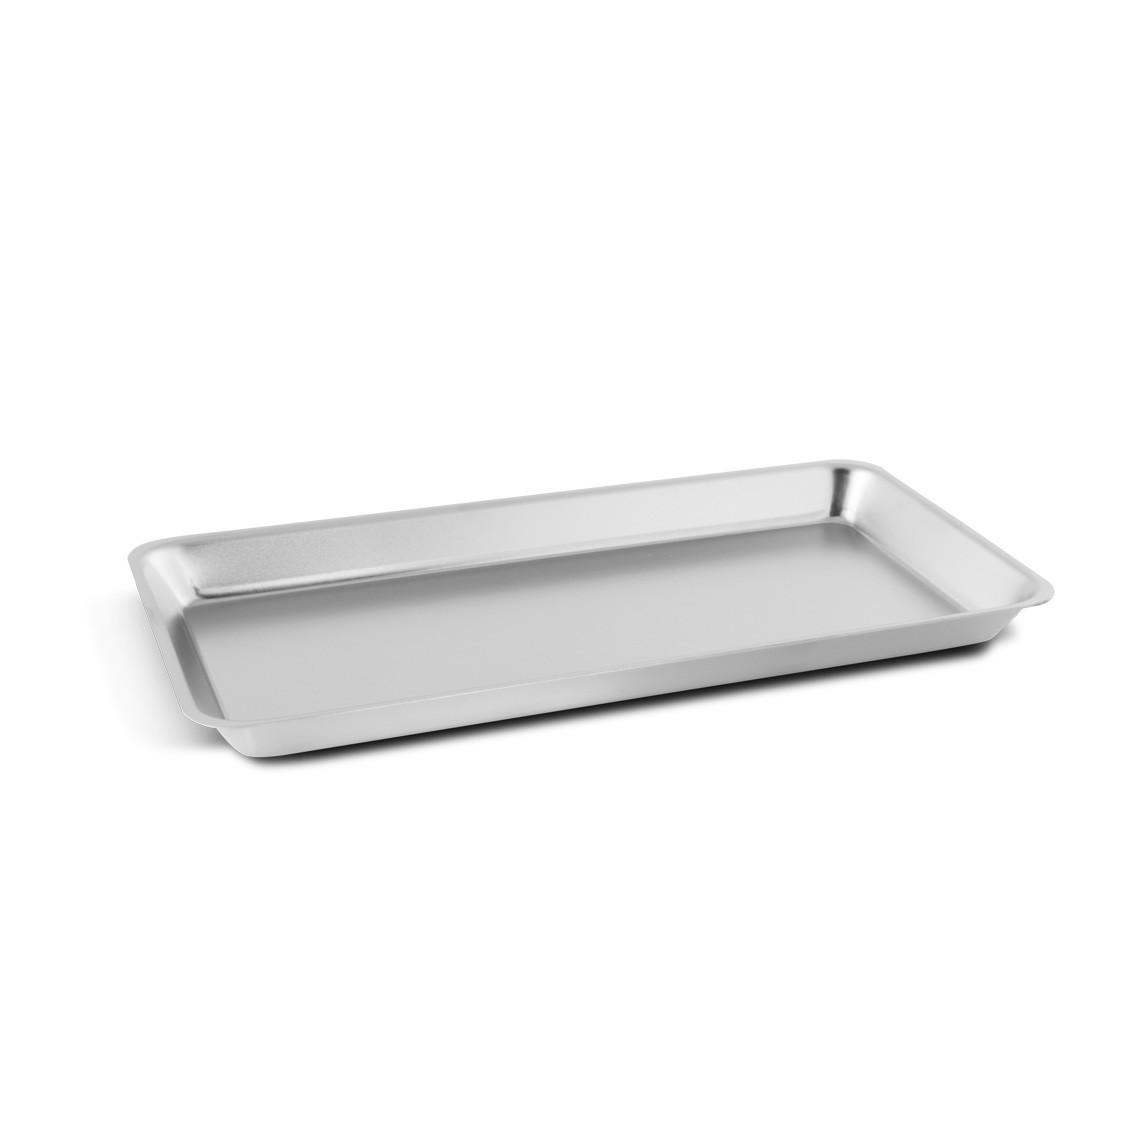 Rectangular stainless steel instrument tray Small size